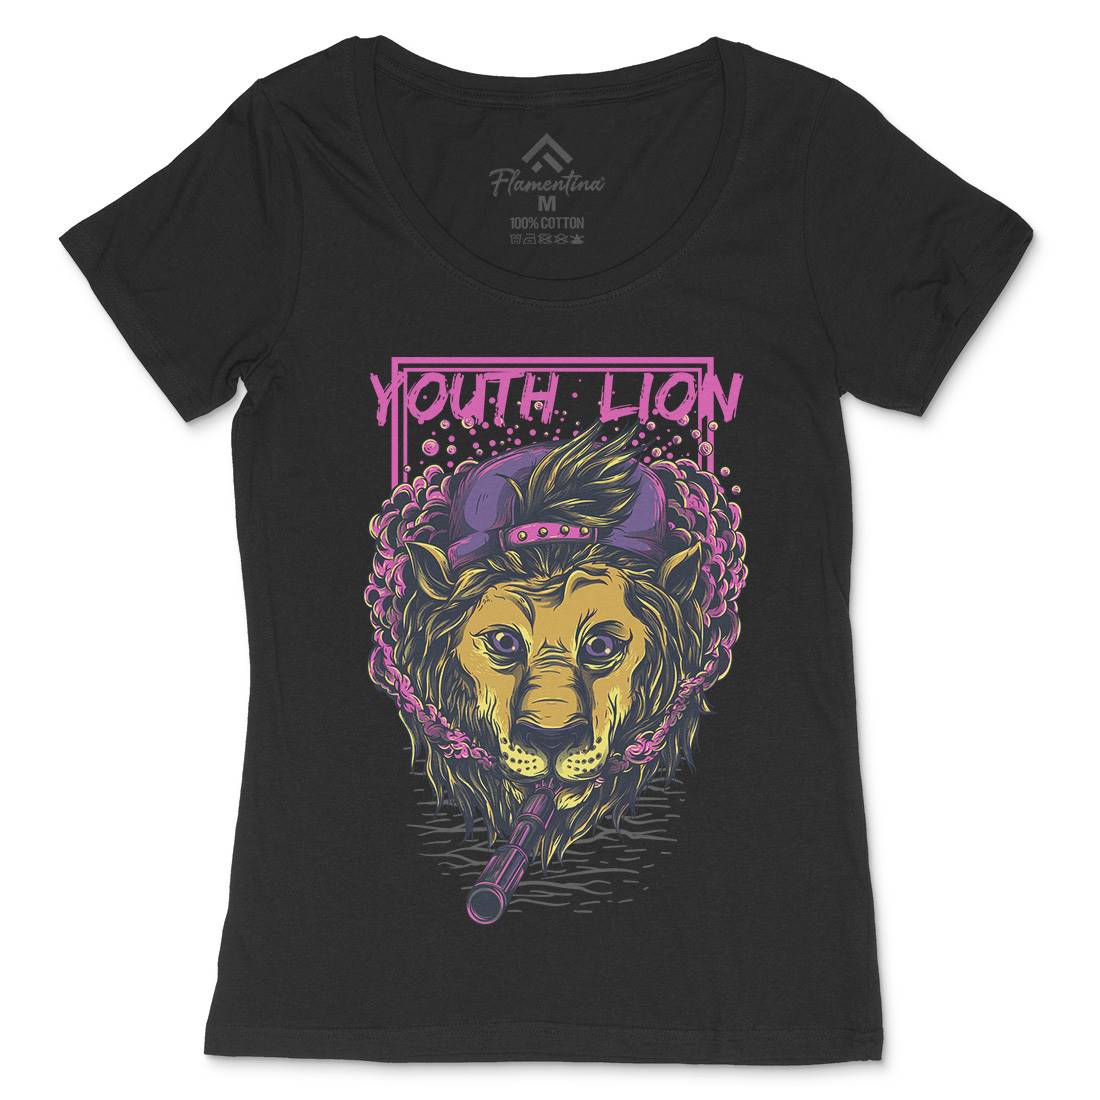 Youth Lion Womens Scoop Neck T-Shirt Animals D893